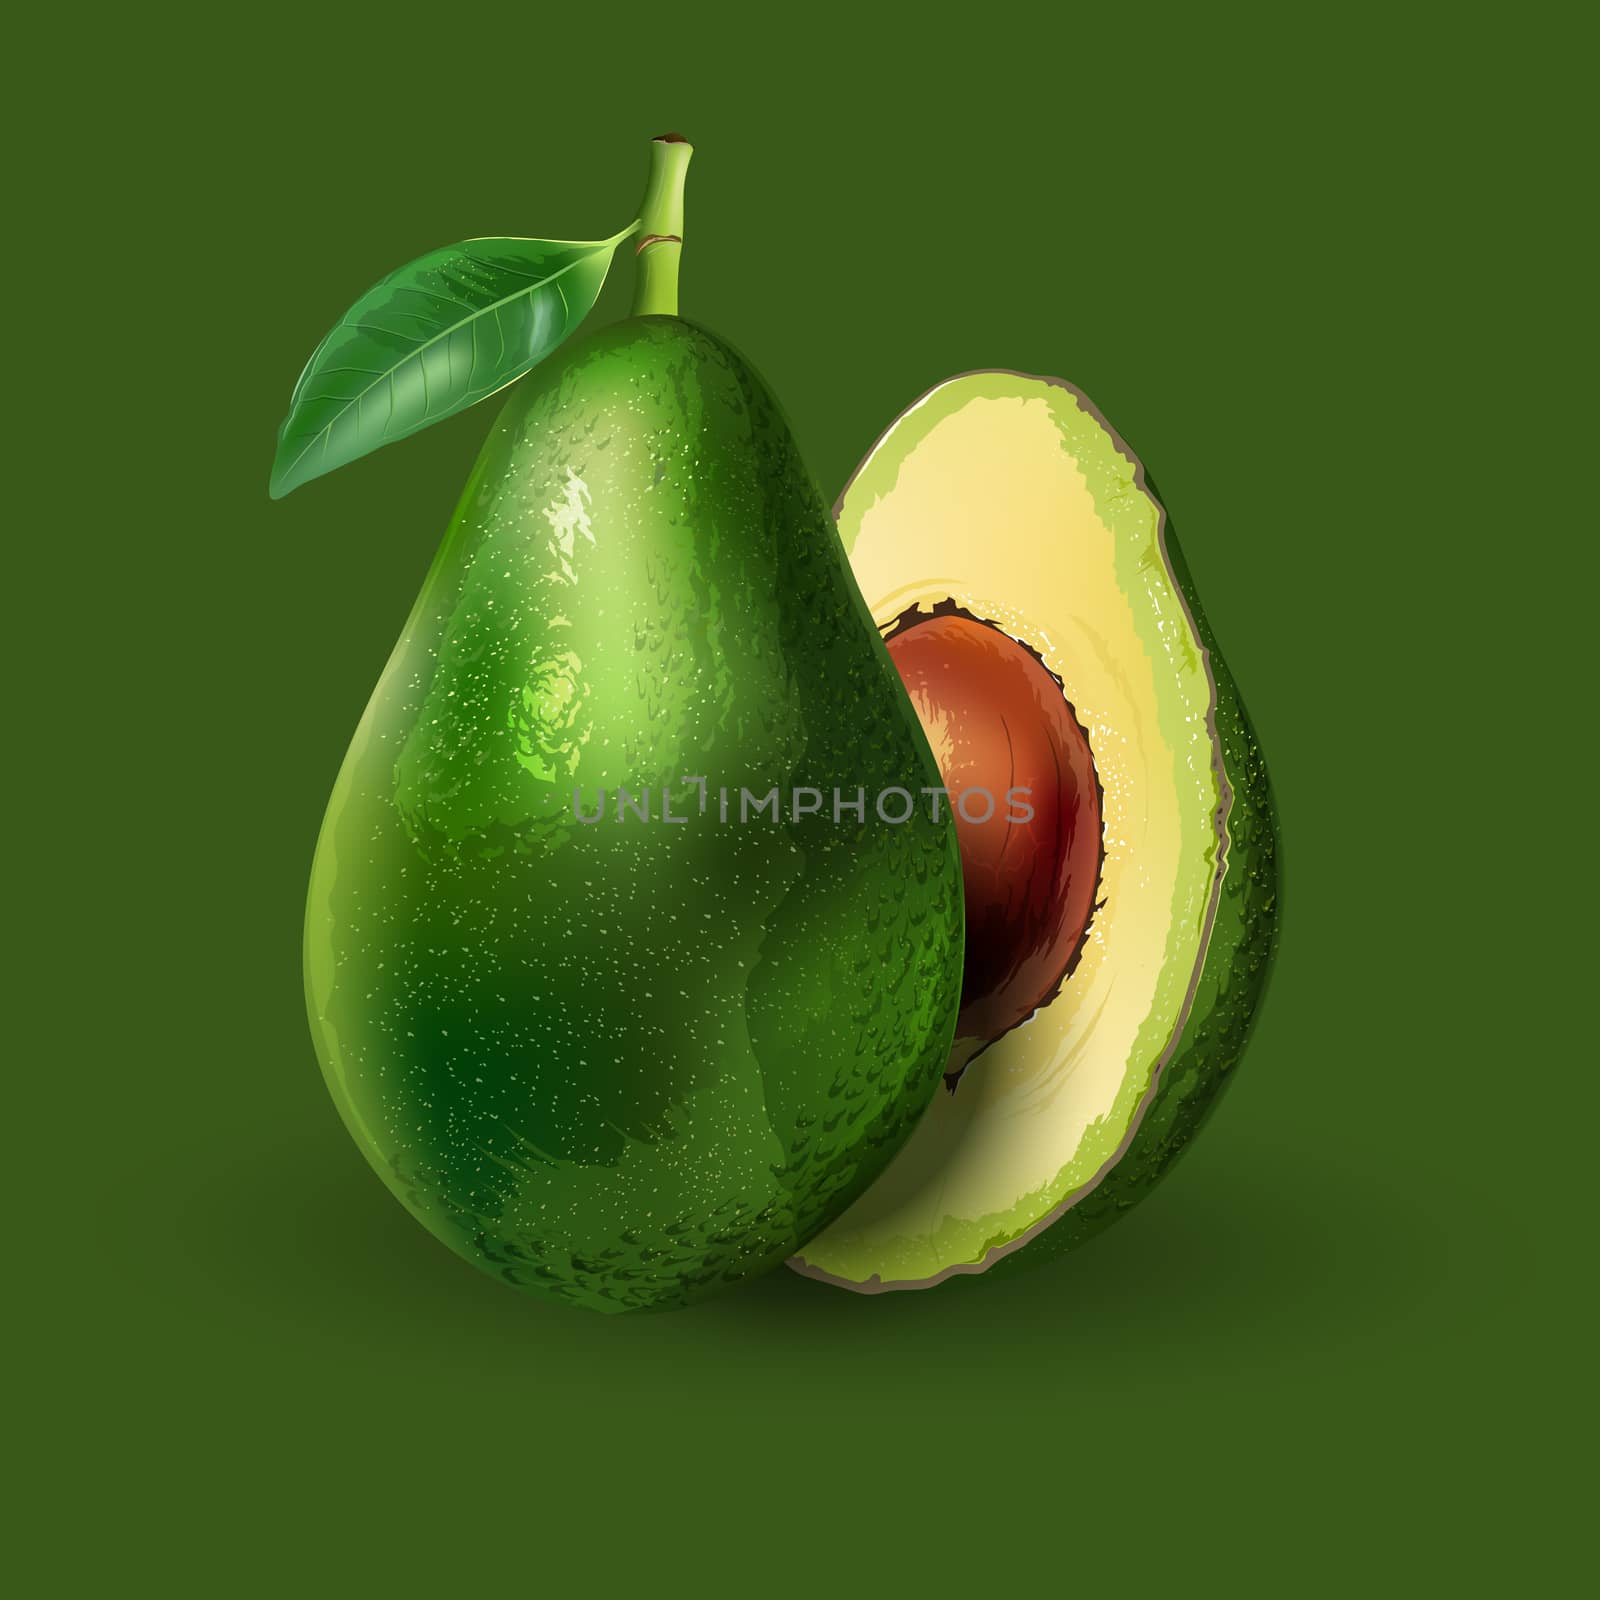 Avocado and slices on a green background.